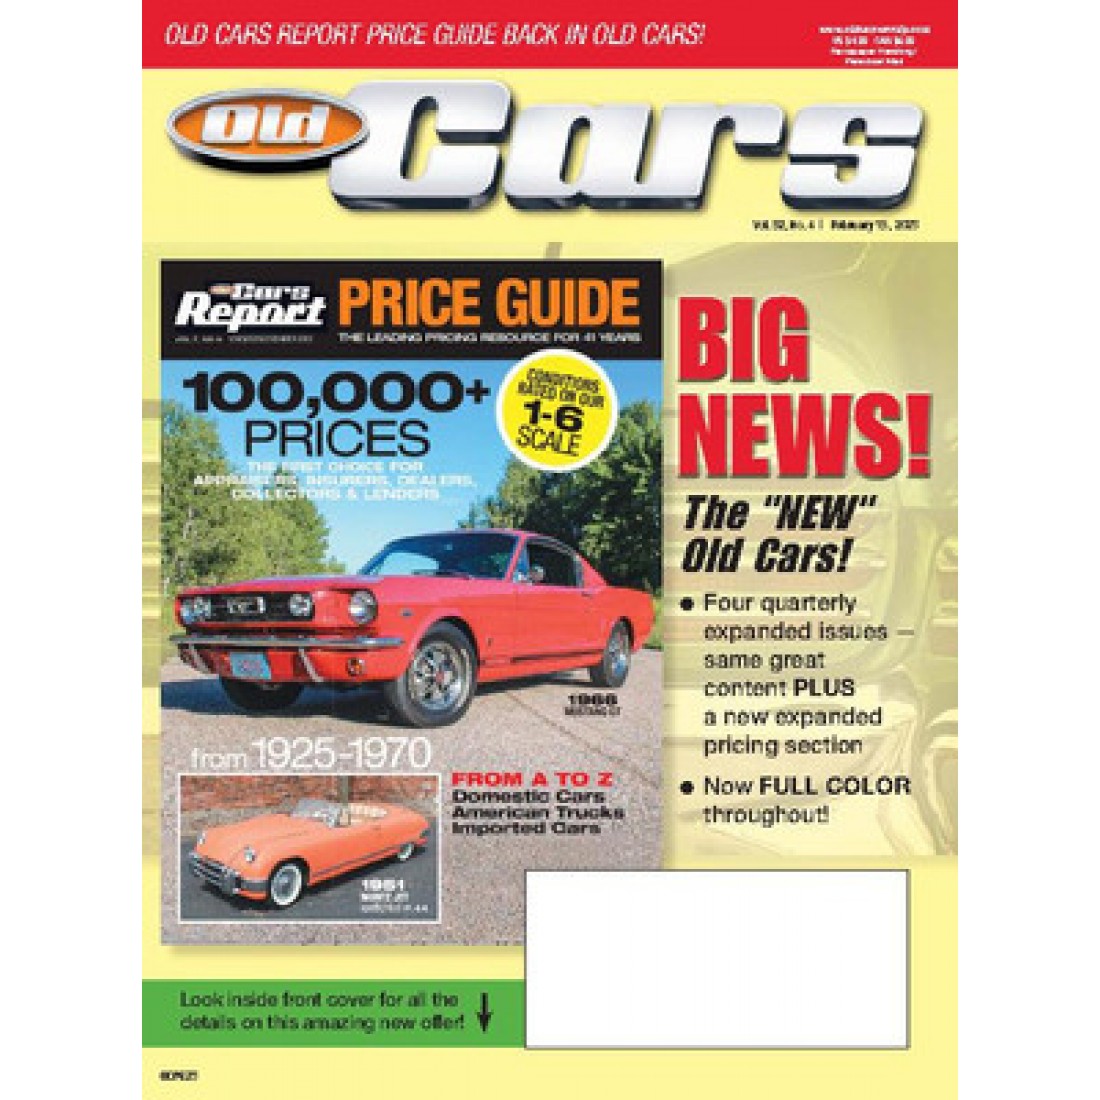 Subscribe or Renew Old Cars Weekly Magazine Subscription. Save 56